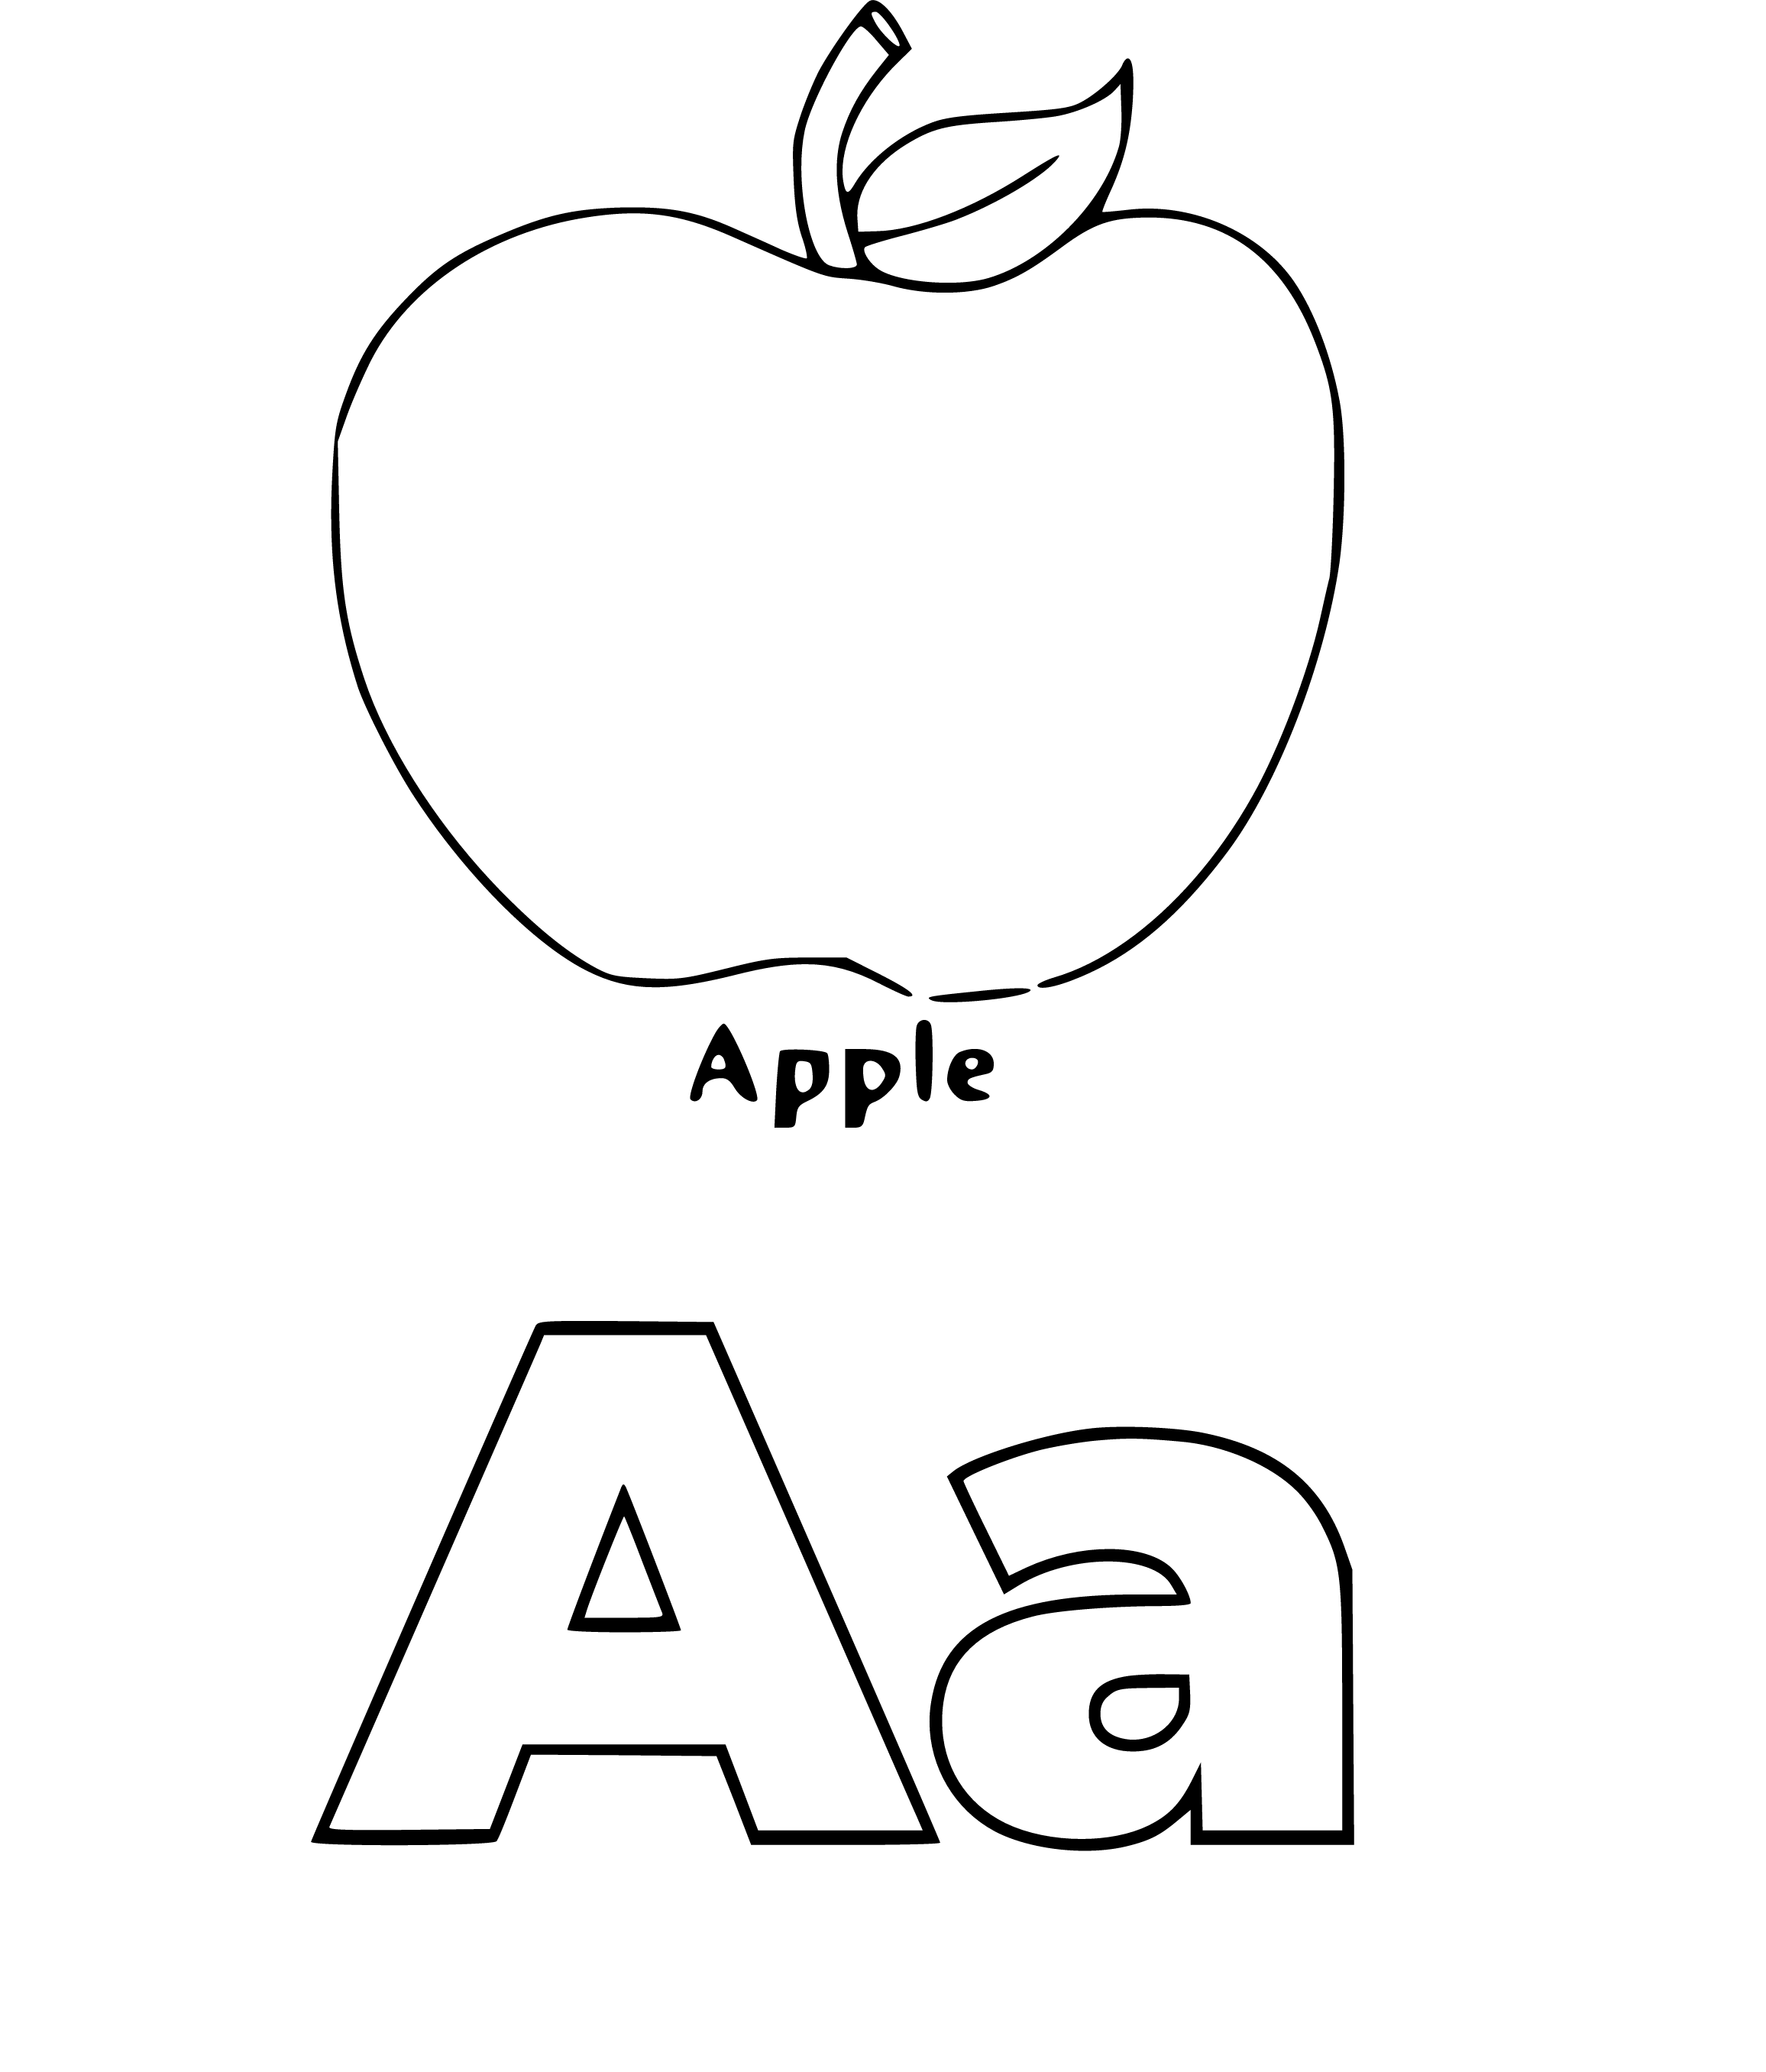 Letter A Coloring Page (uppercase and lowercase) - SheetalColor.com